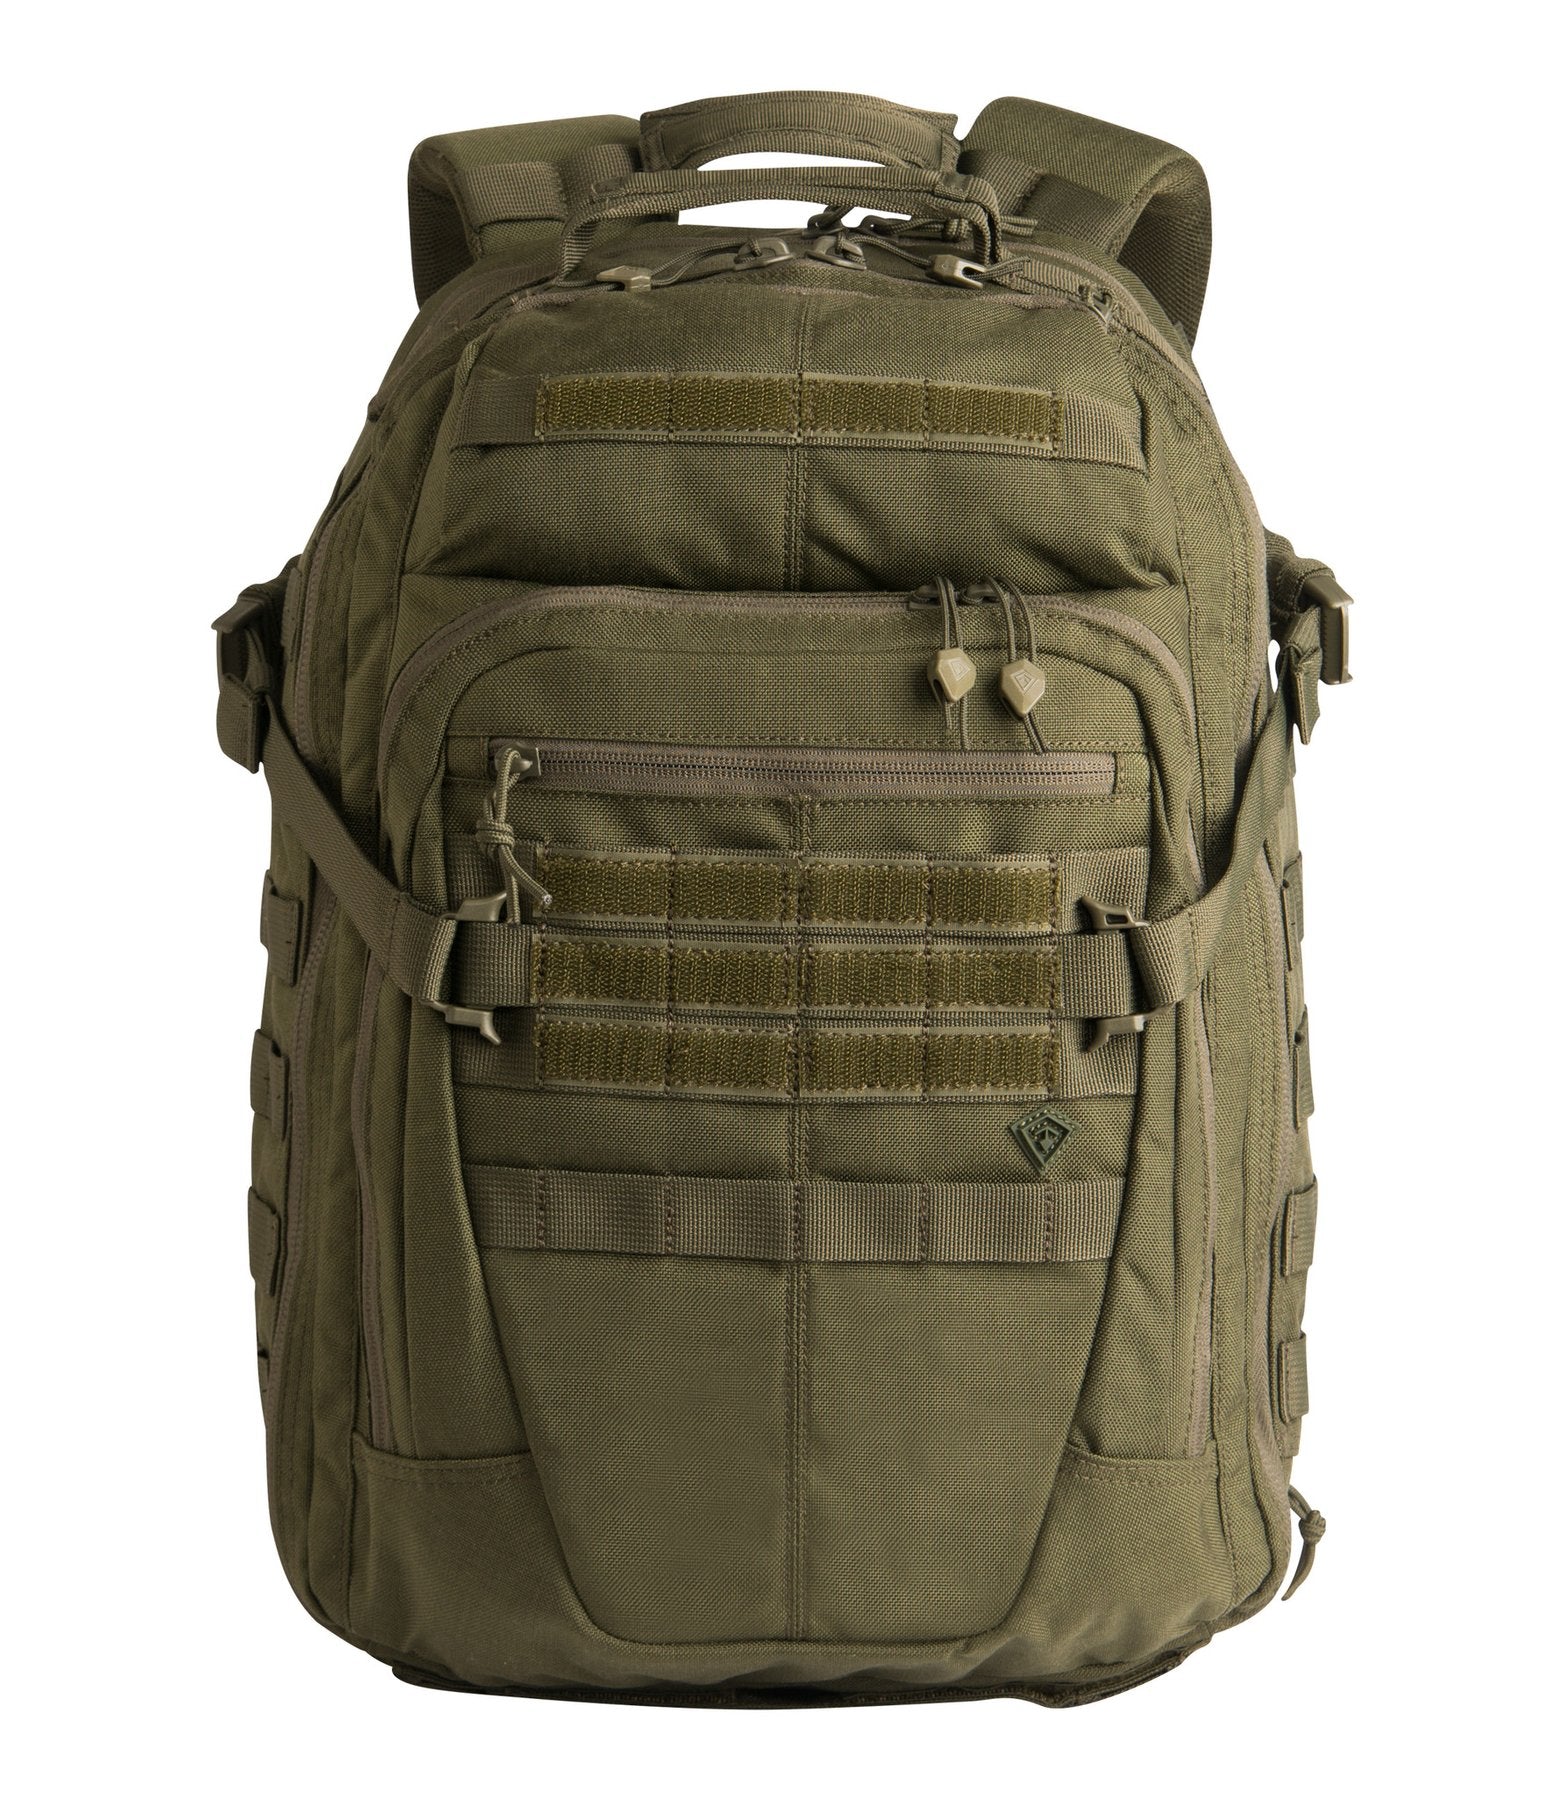 Specialist 1-Day Backpack 36L (180005) Black, Coyote, OD Green